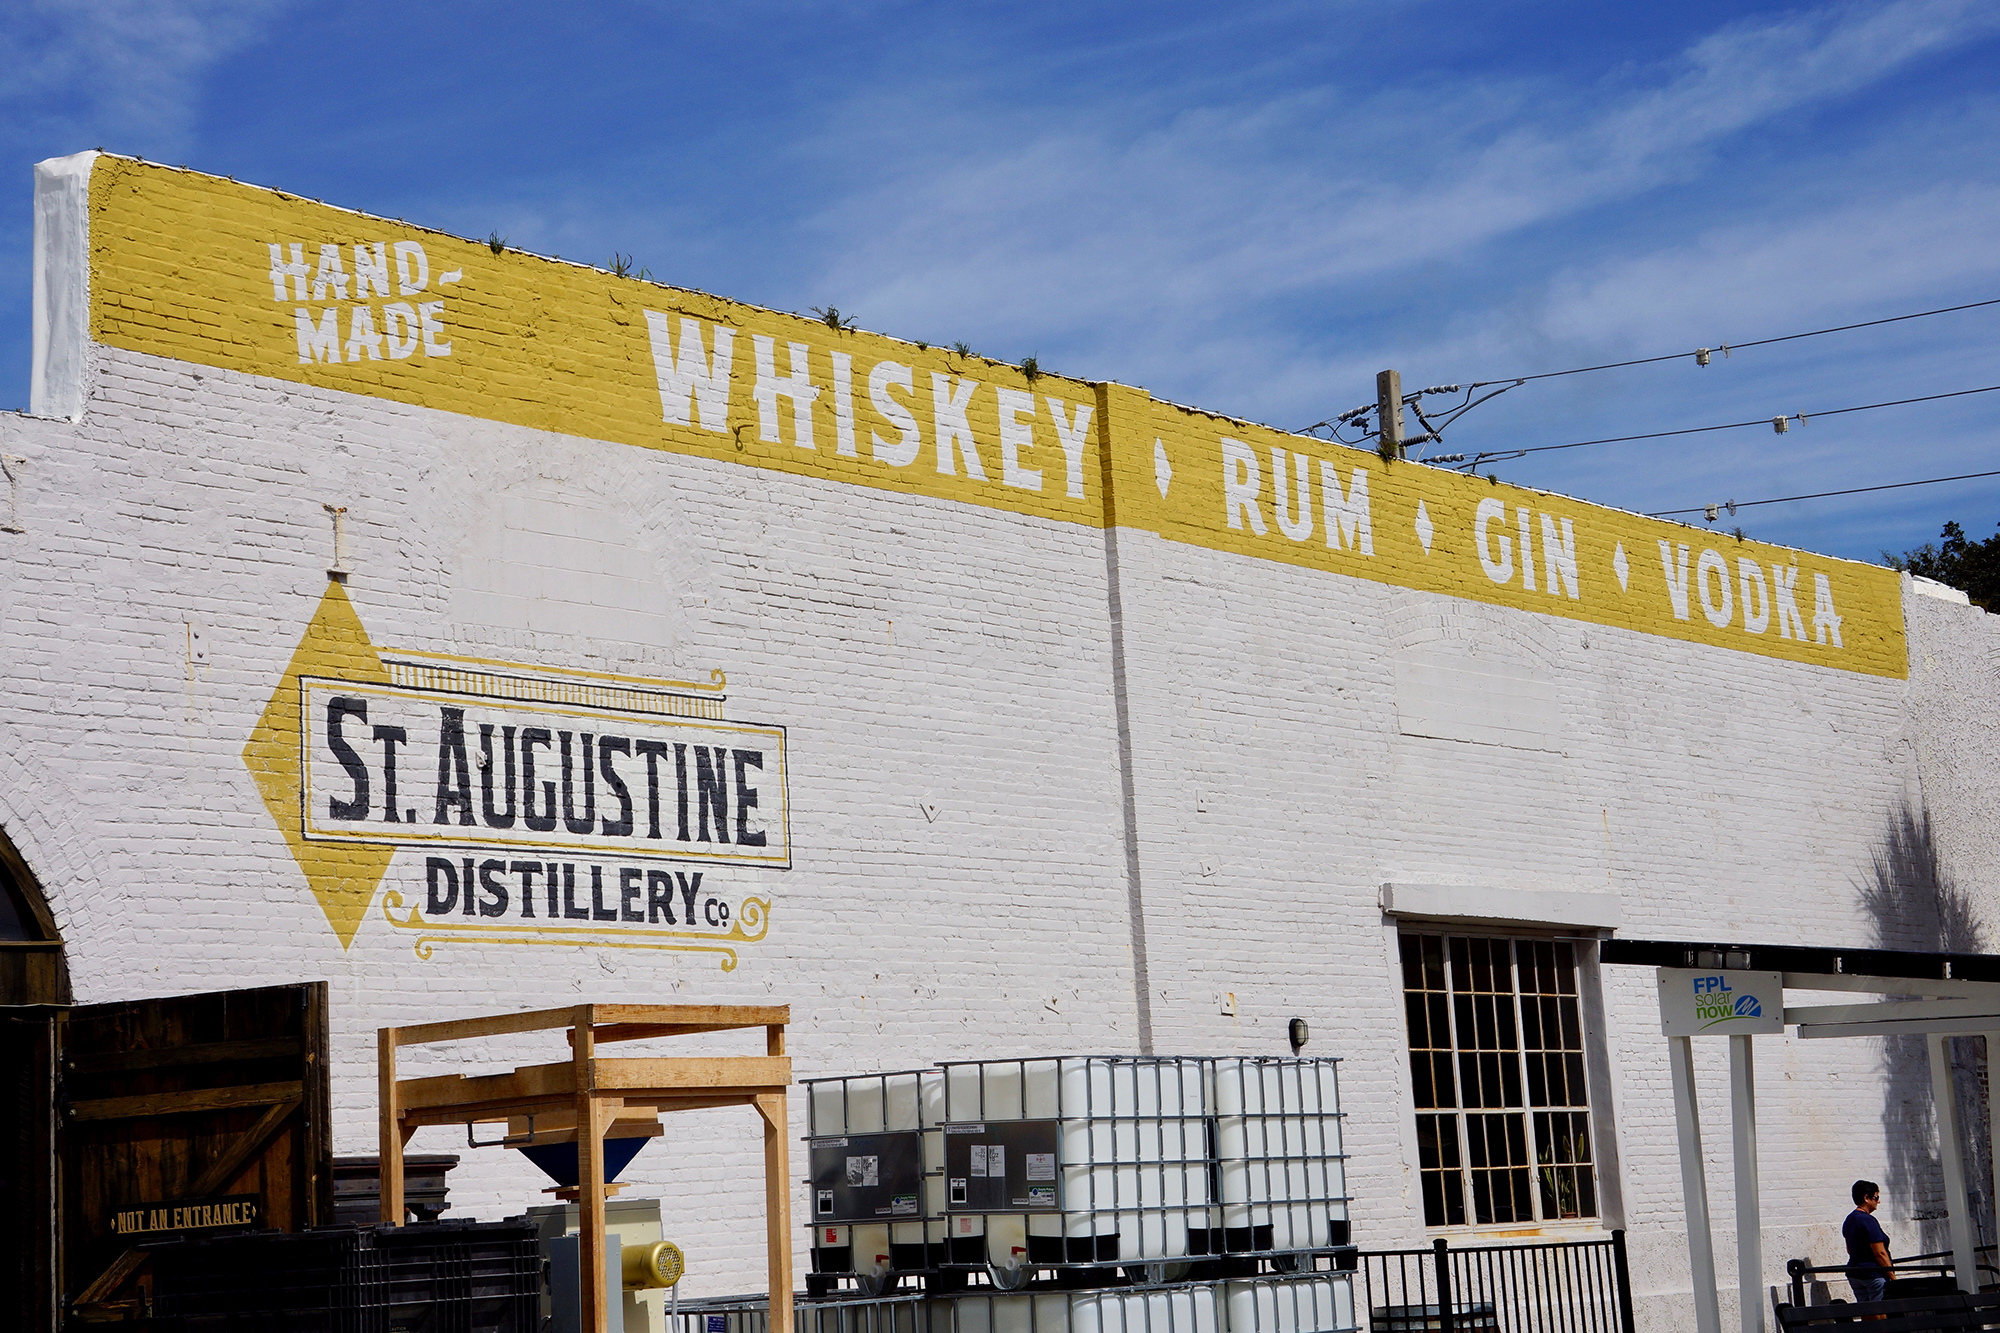 St. Augustine Distillery employs 50 people and annually produces 25,000 to 30,000 cases of spirits at six bottles each.